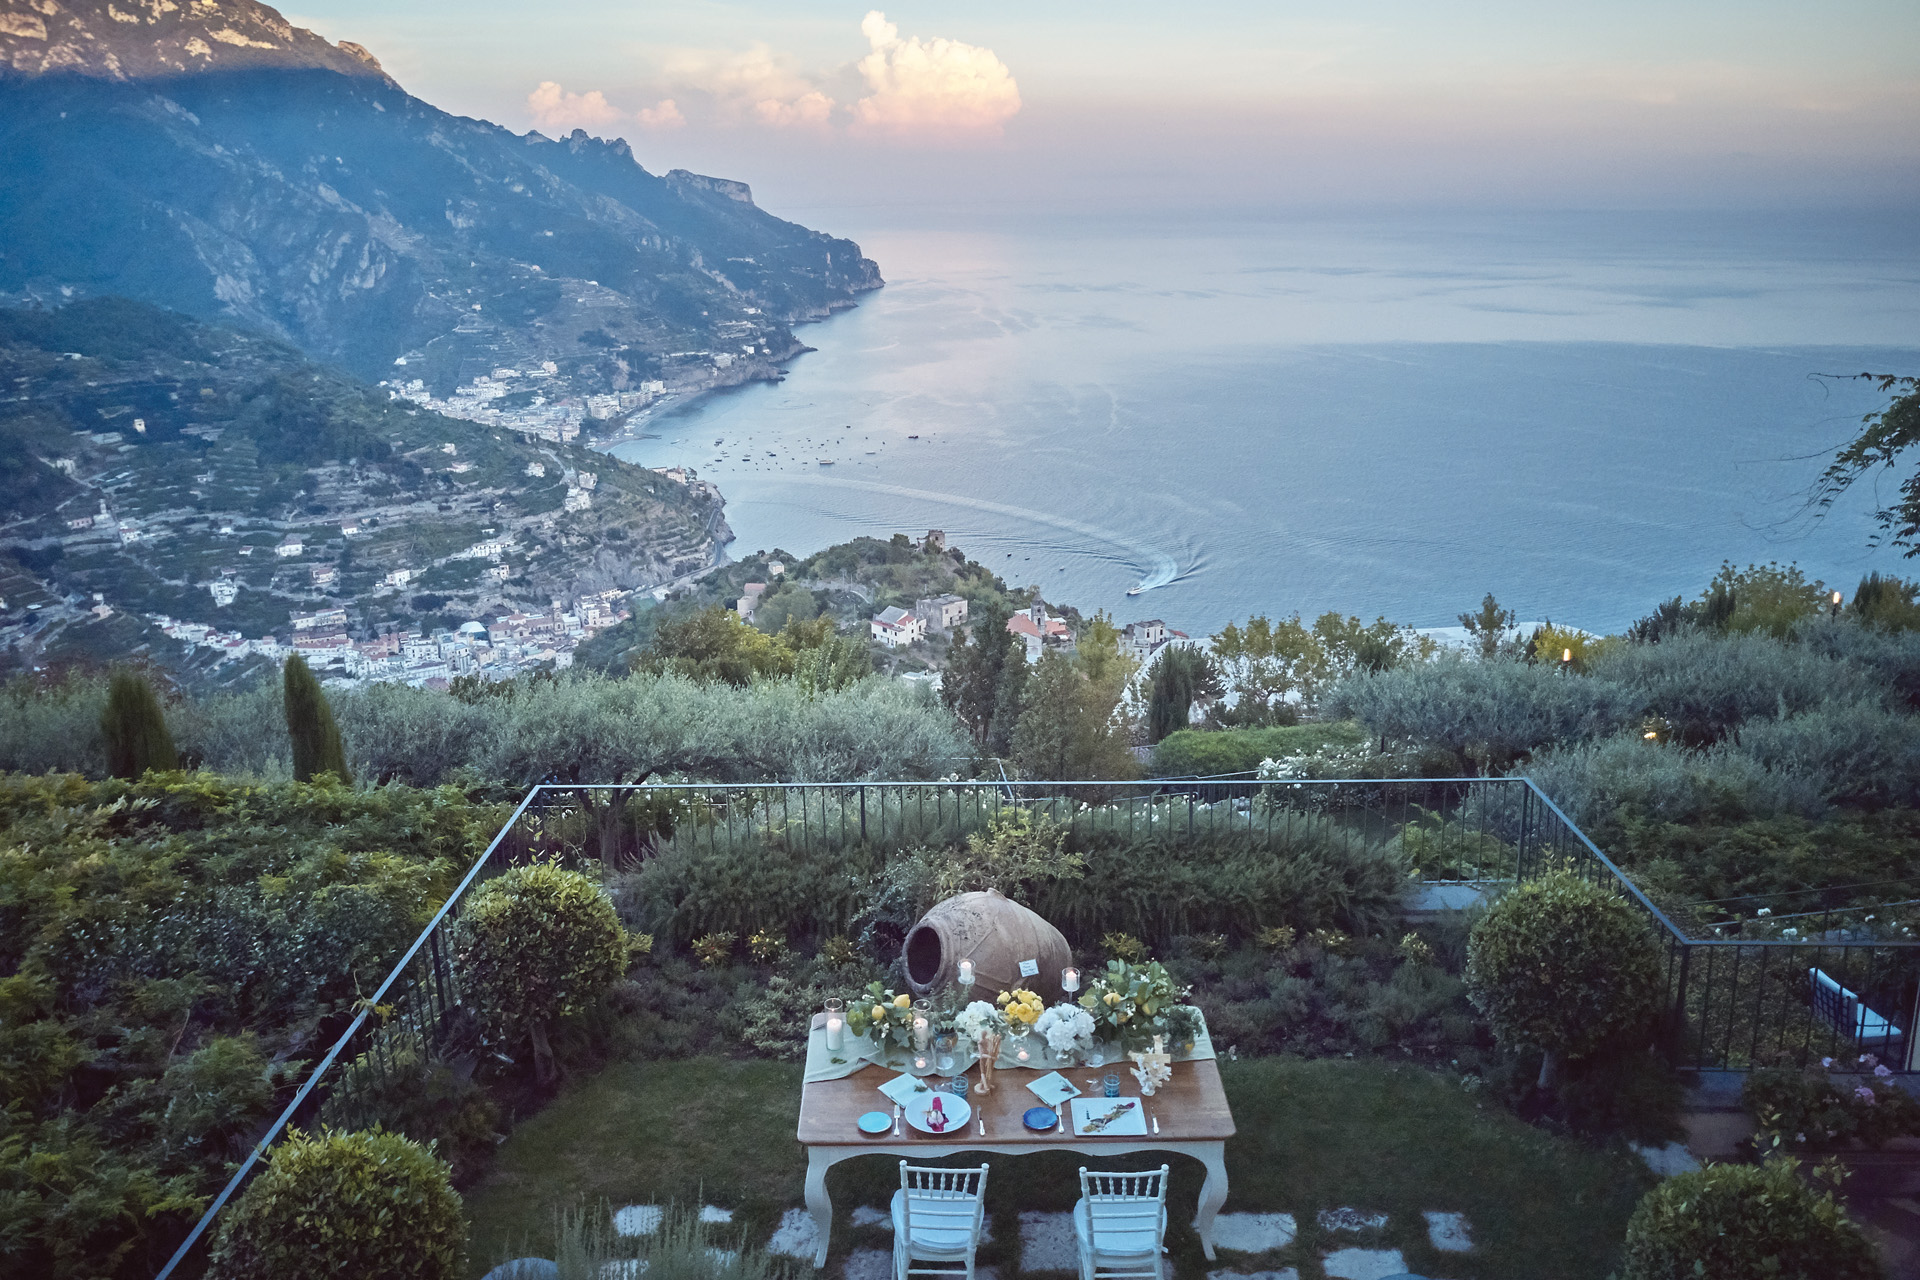 the view from Belmond Caruso onto the Amalfi Coast